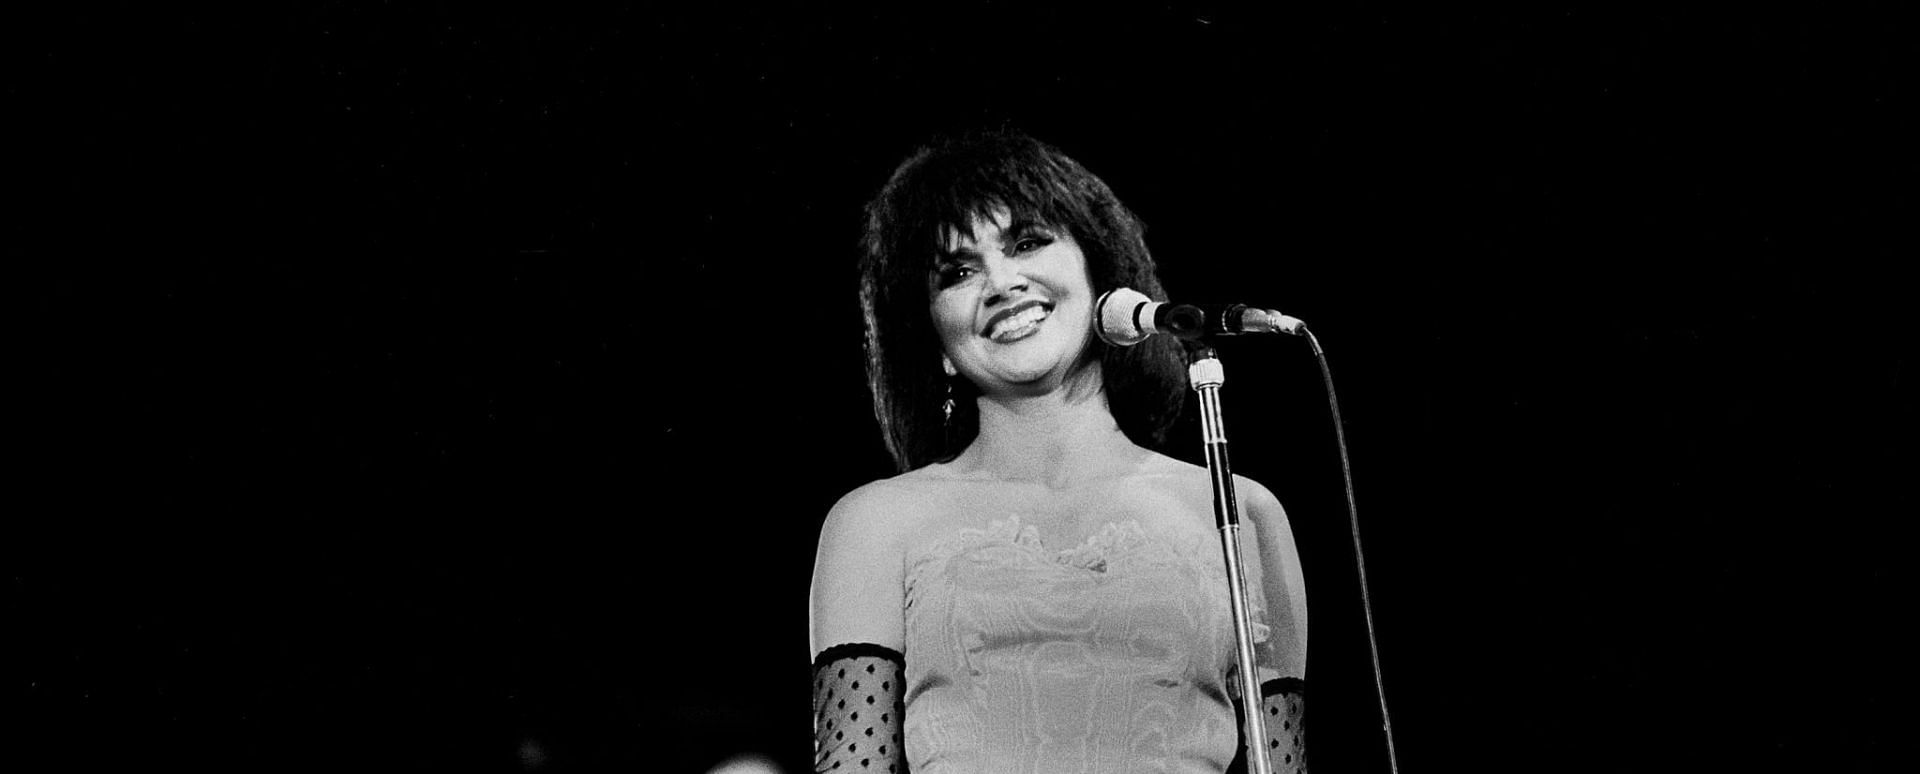 Linda Ronstadt&rsquo;s on Twitter trending page sparked concern online (Image via Getty Images)